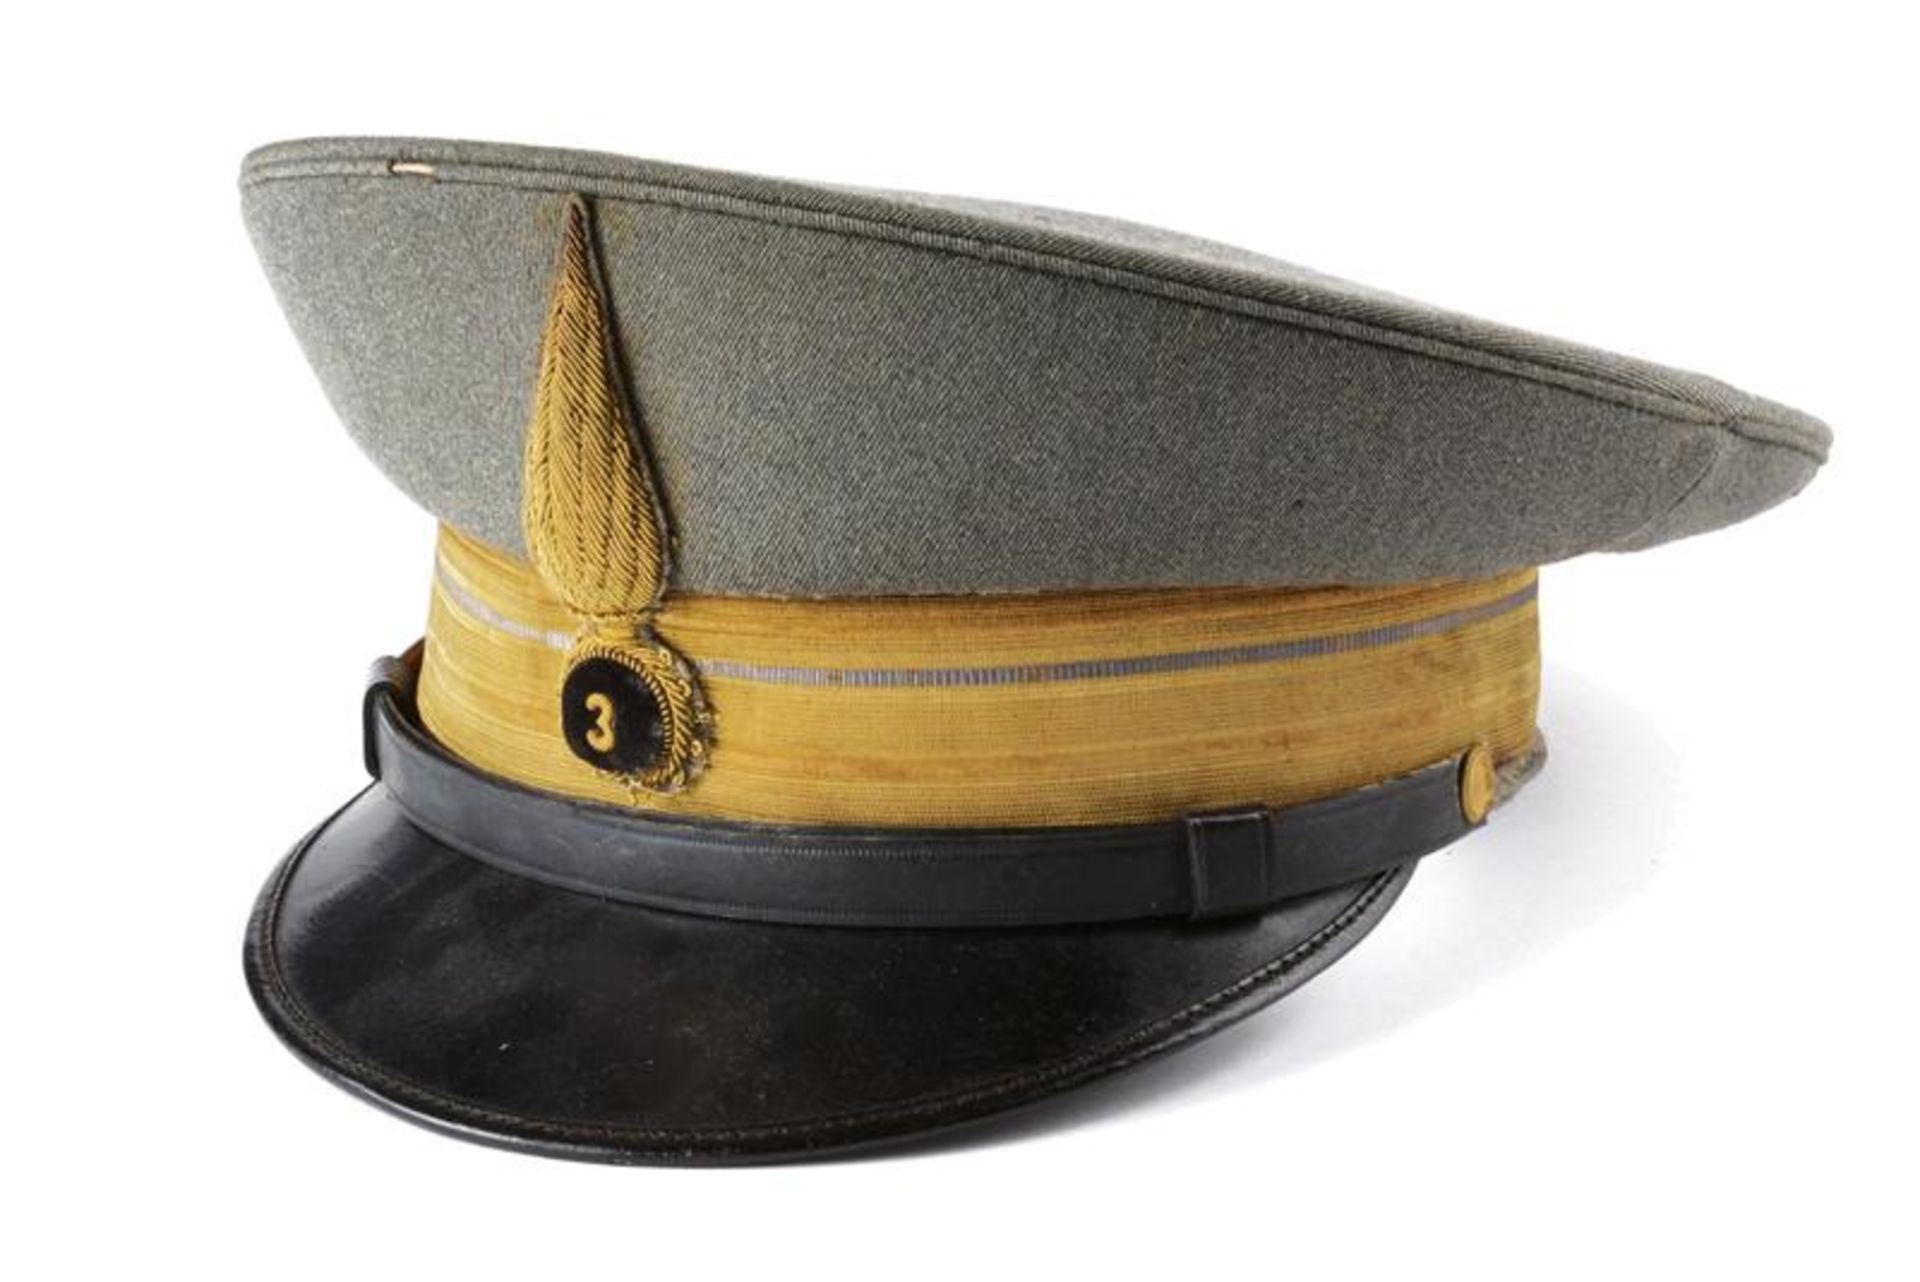 A 1934 model cap for a major of the 'Savoia Cavalleria' regiment